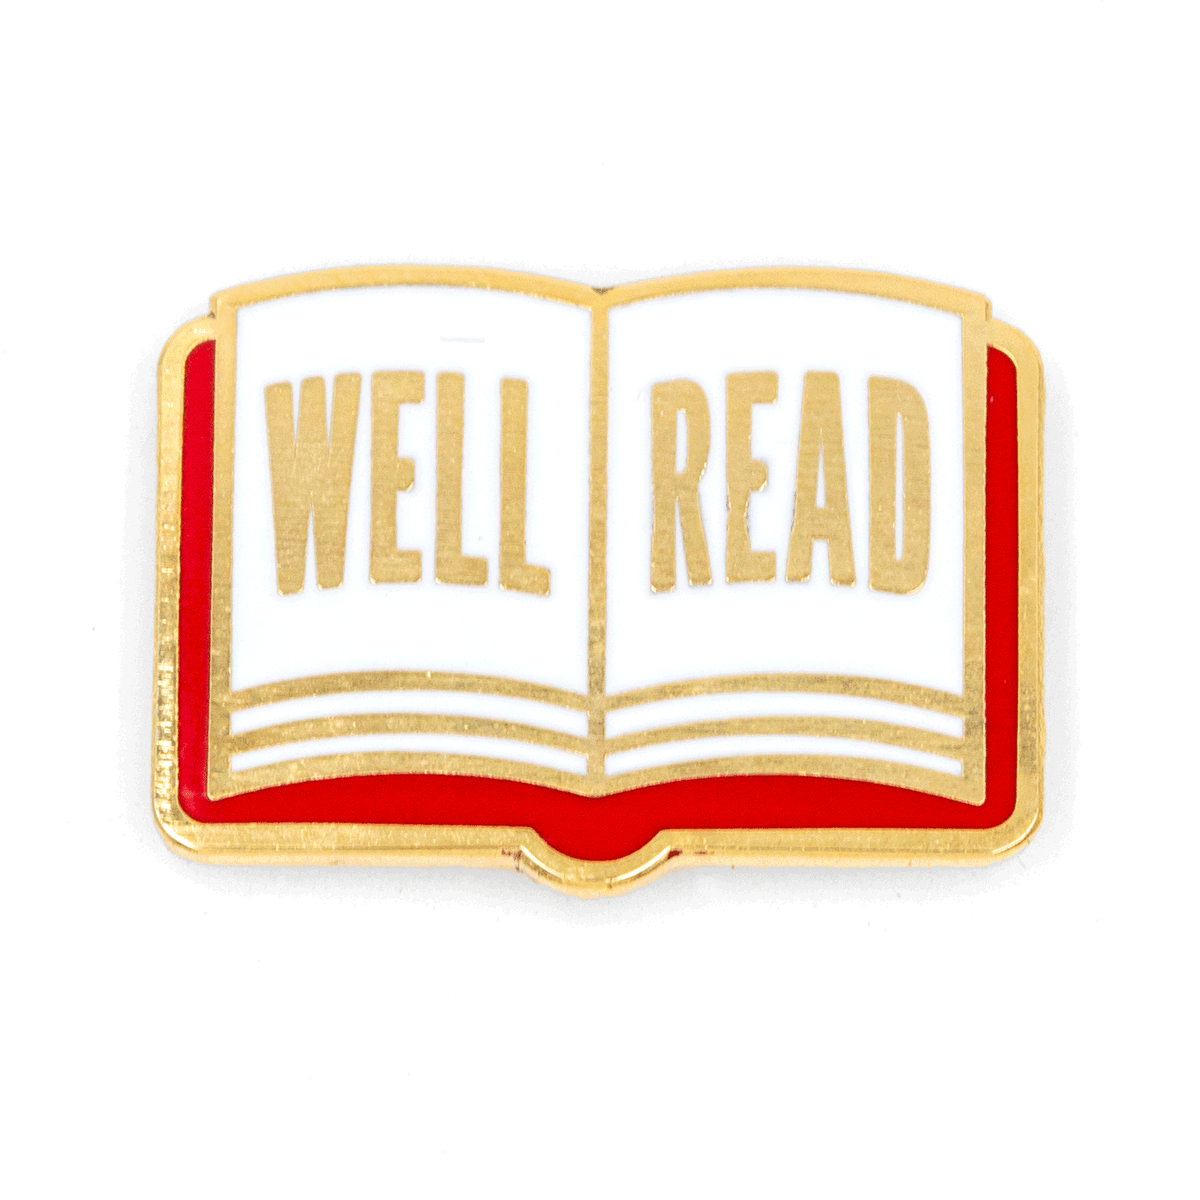 Well Read Pin